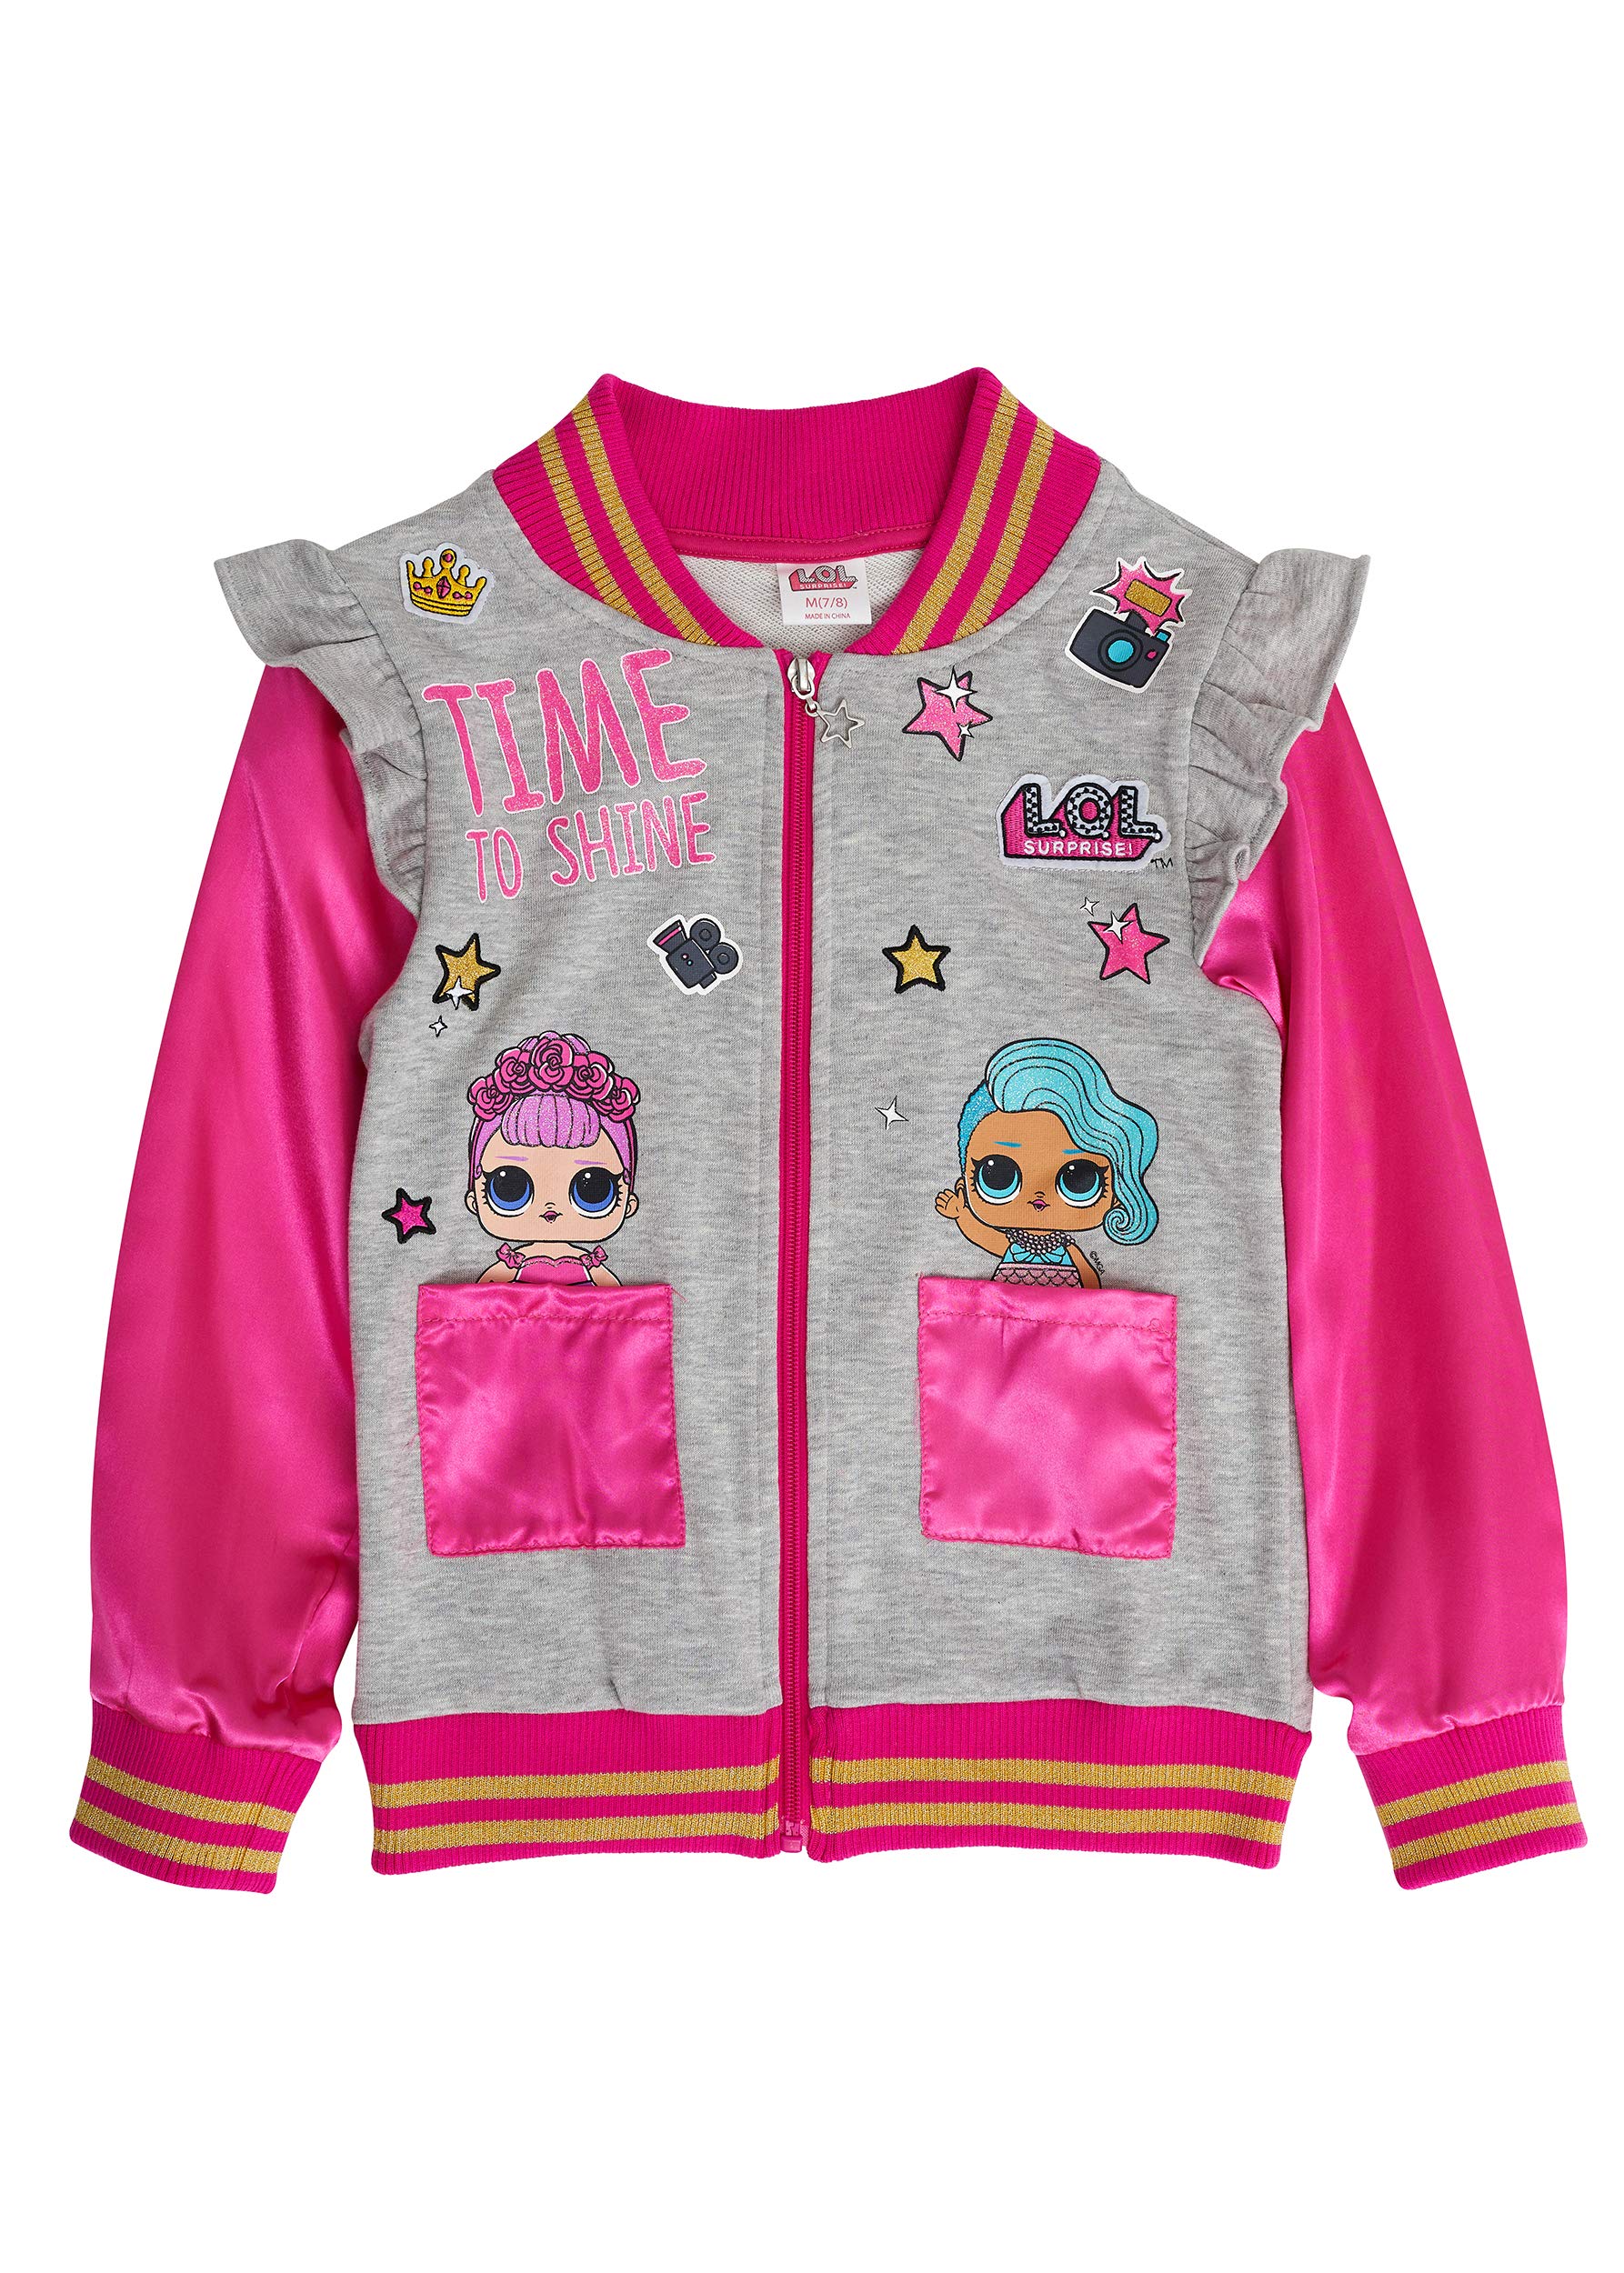 L.O.L. Surprise! Girls' Bomber Pink Sparkly Sleeve 'Time to Shine' Sequin Jacket